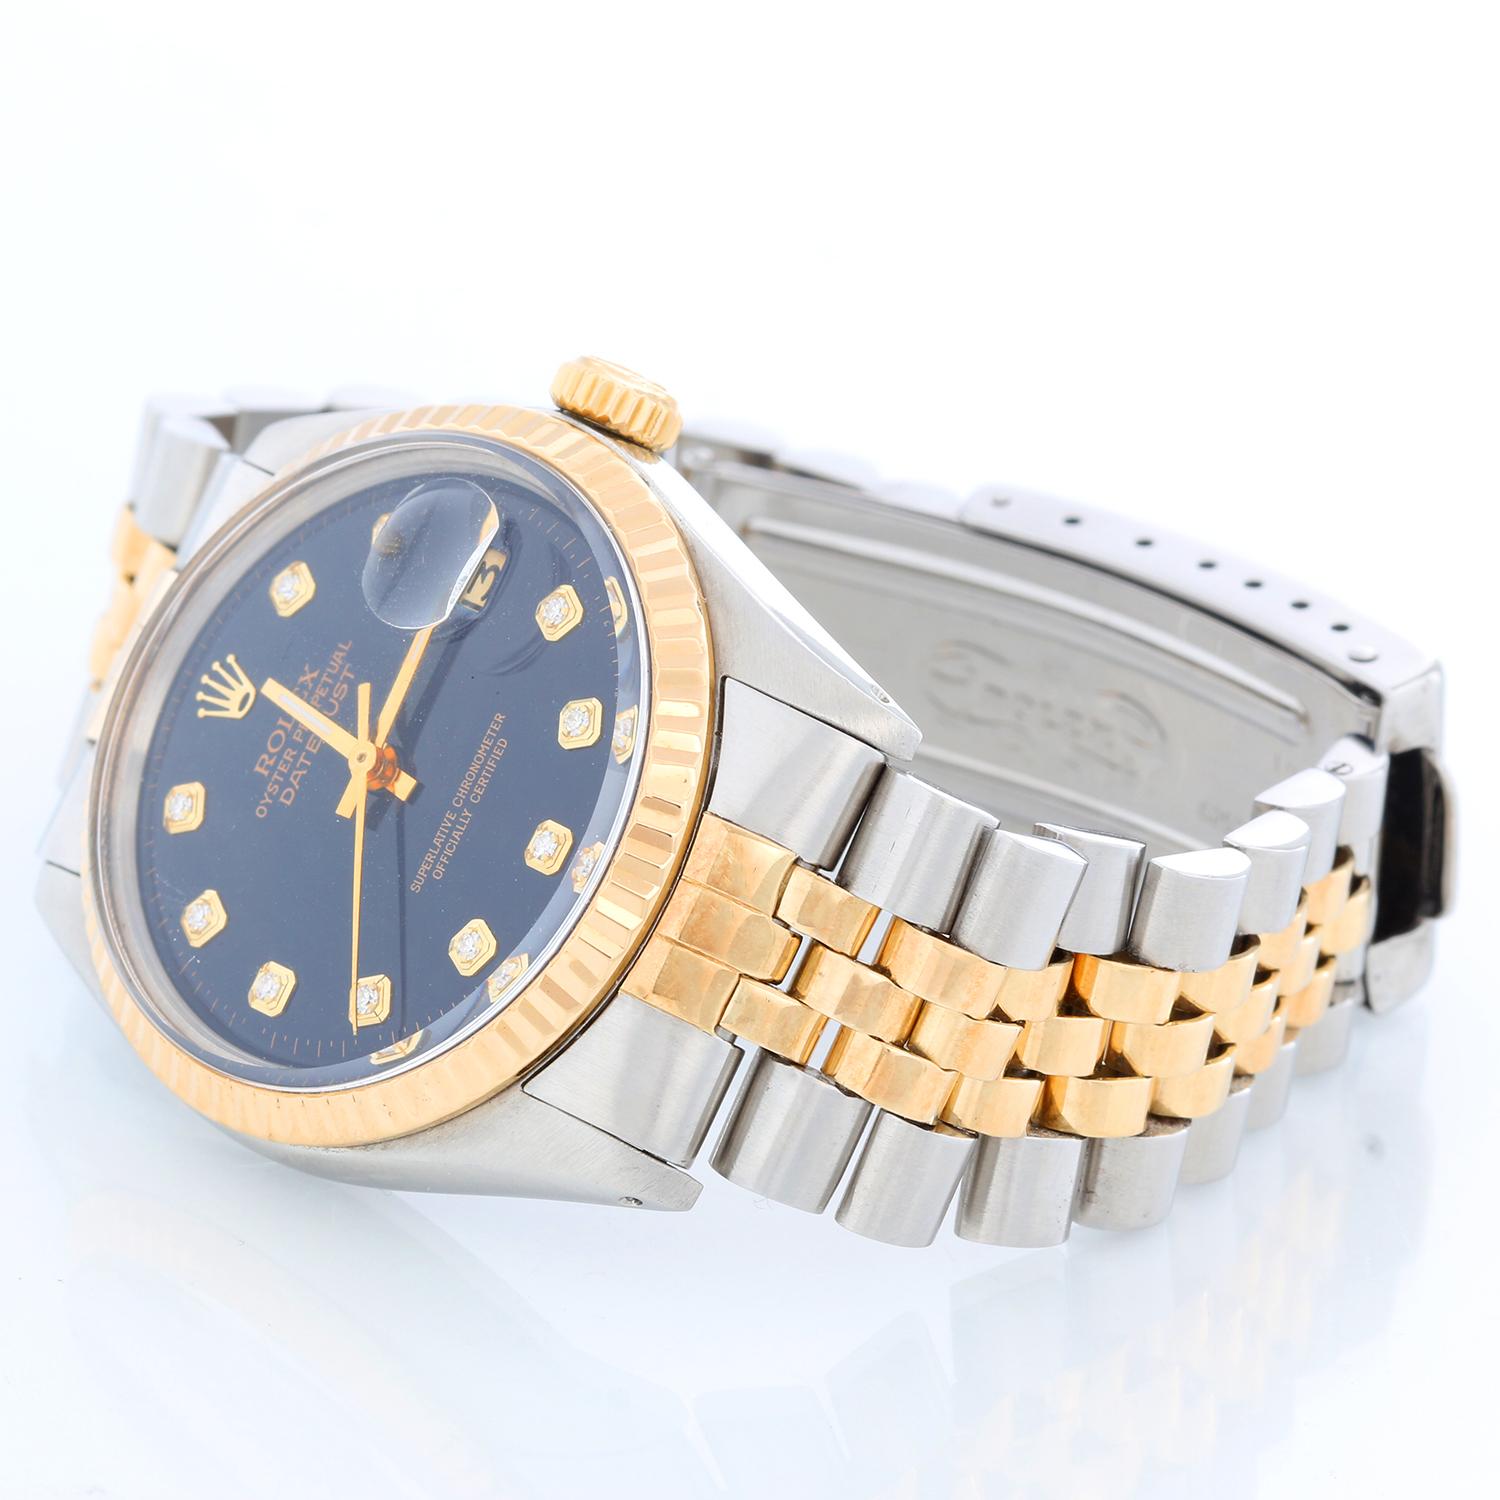 Men's Rolex Datejust 2-Tone Watch 1601 - Automatic winding, 27 jewels, Quickset, acrylic crystal. Stainless steel and 18k yellow gold fluted bezel. Blue Rolex diamond dial. 14K Two-tone Jubilee bracelet. Pre-owned with custom box. 